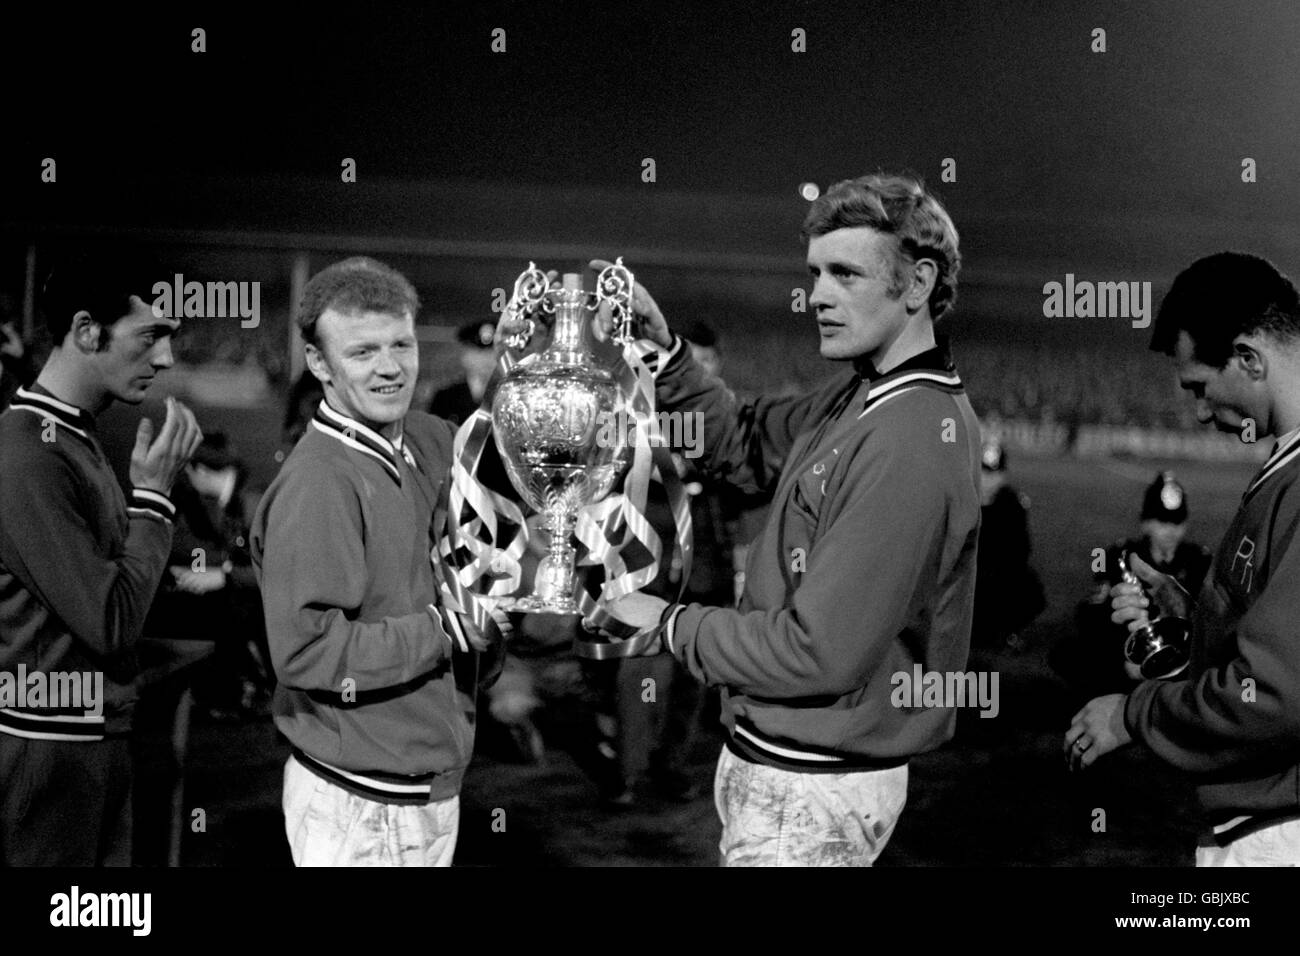 Leeds United's Billy Bremner (l) and Gary Sprake (r) show off the League Championship trophy to the fans at Elland Road Stock Photo